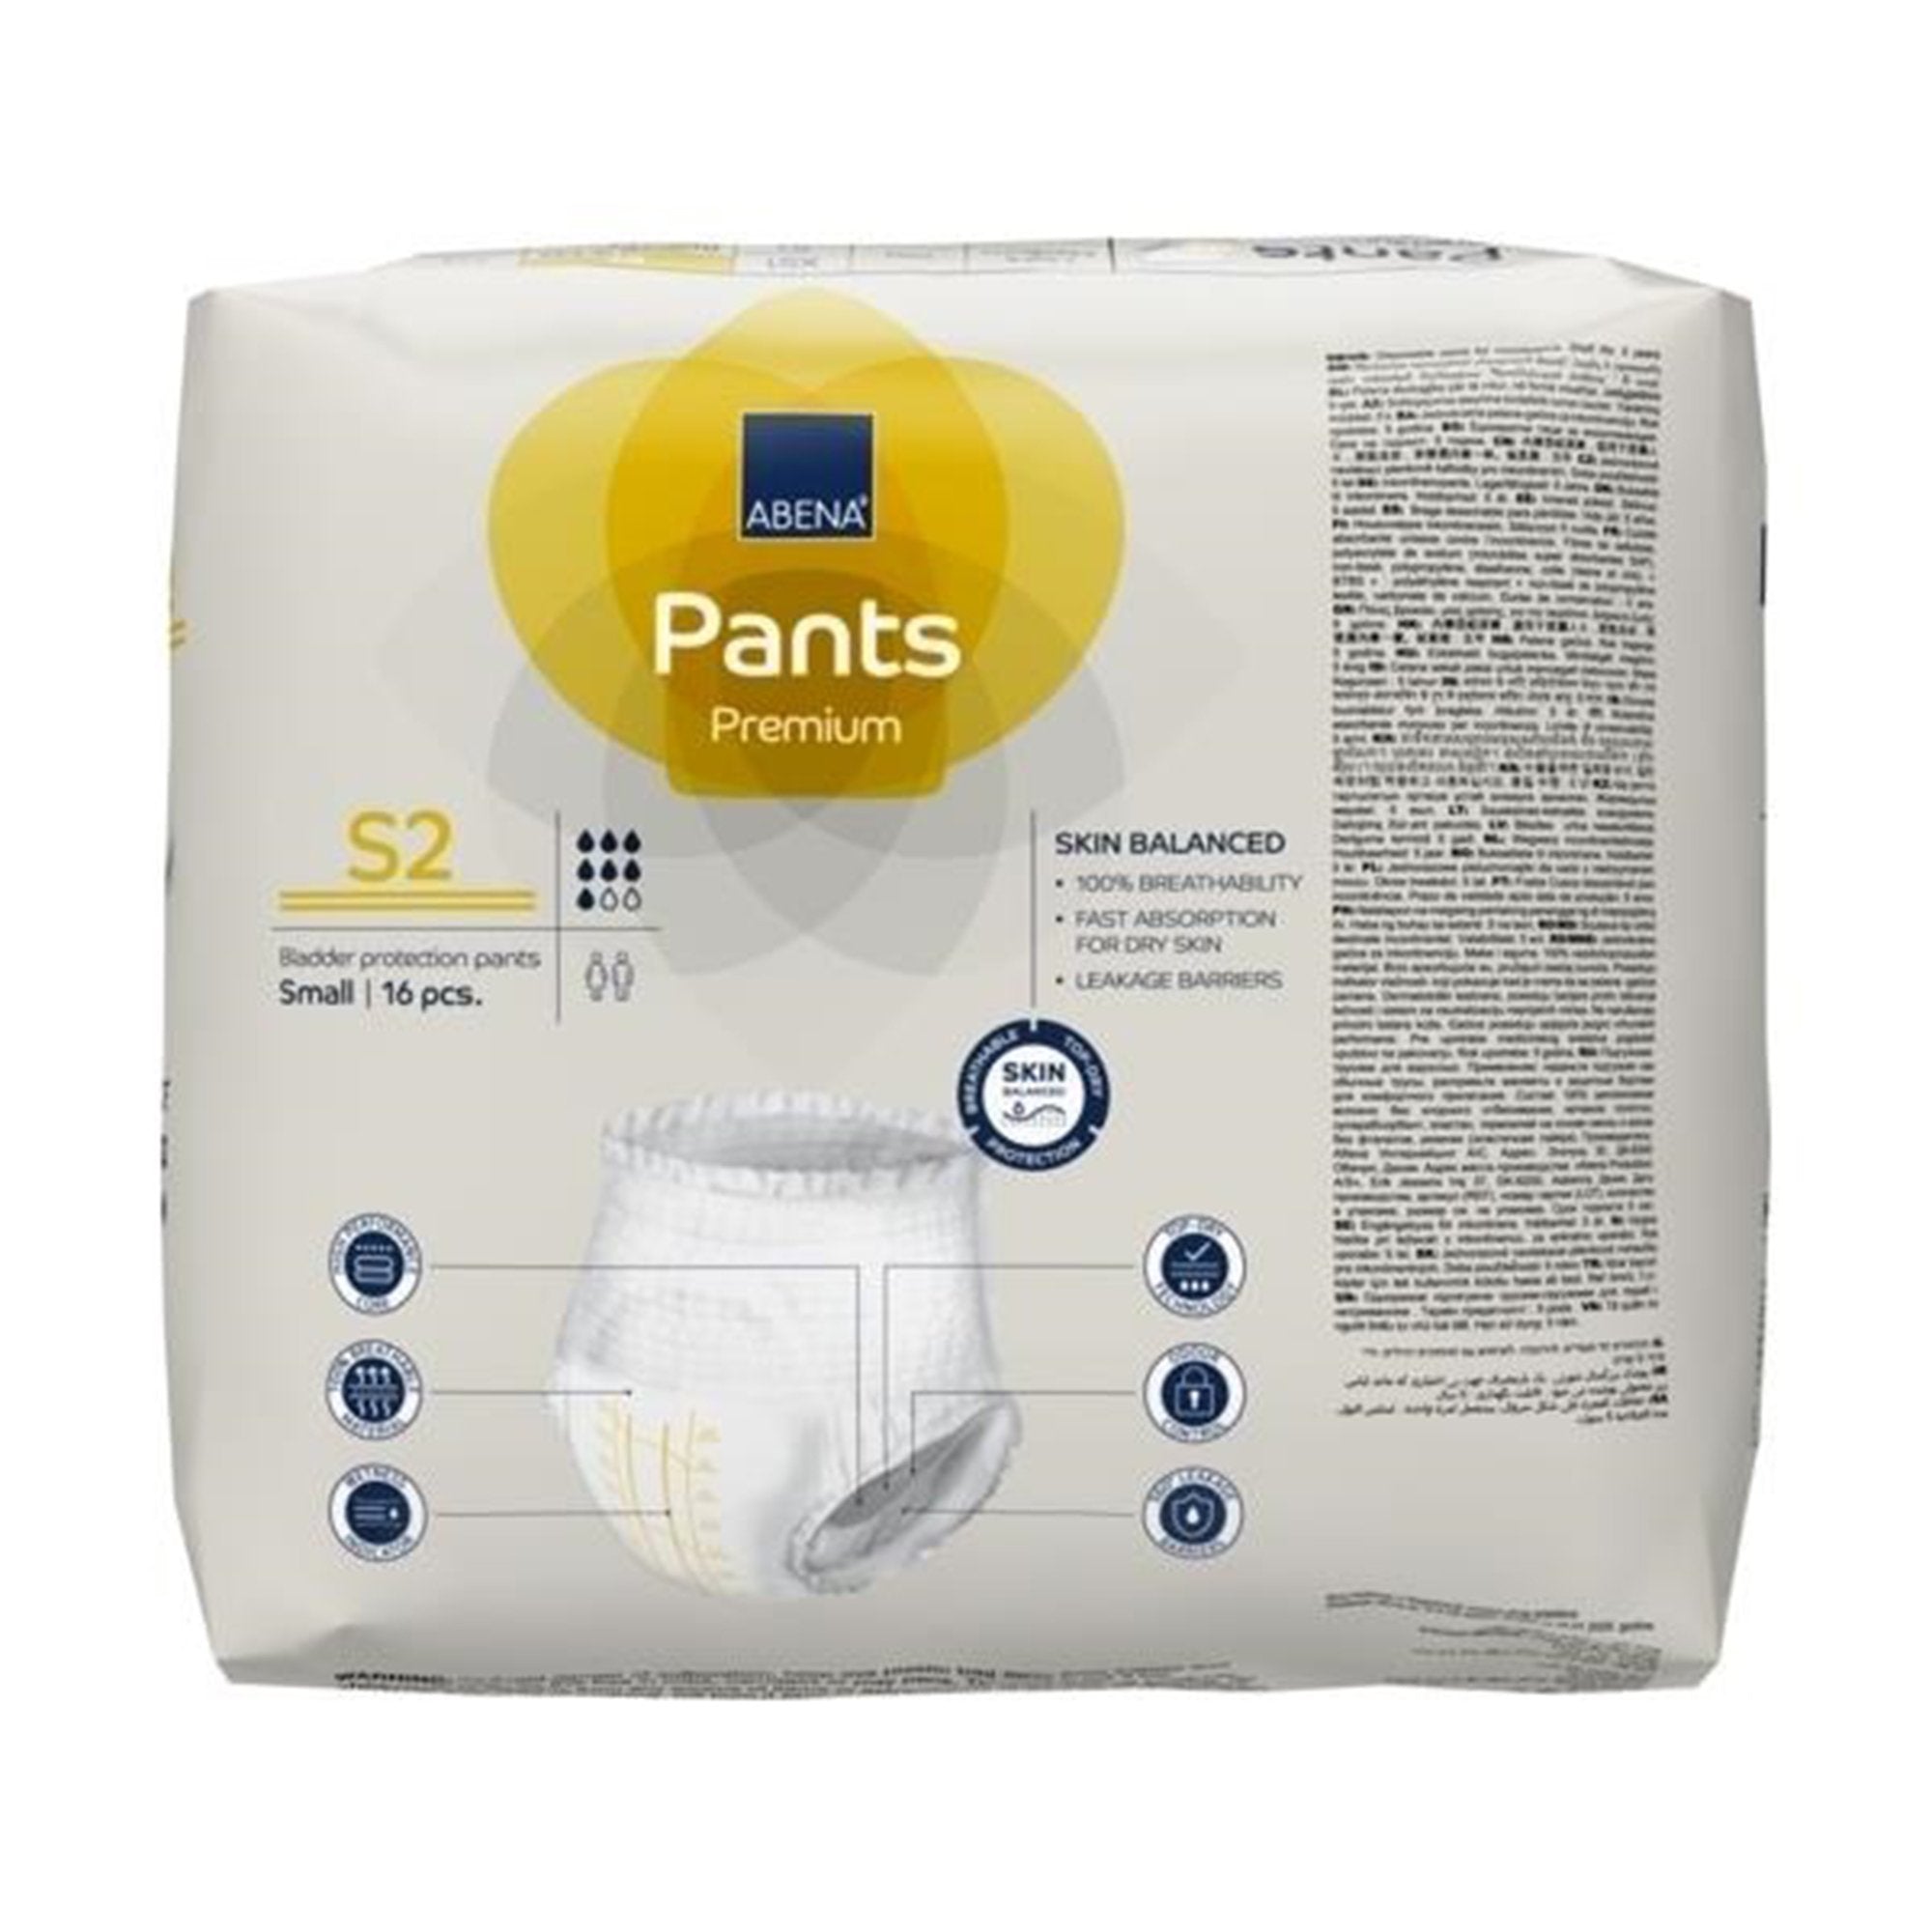 Unisex Adult Absorbent Underwear Abena Premium Pants S2 Pull On with Tear Away Seams Small Disposable Moderate Absorbency